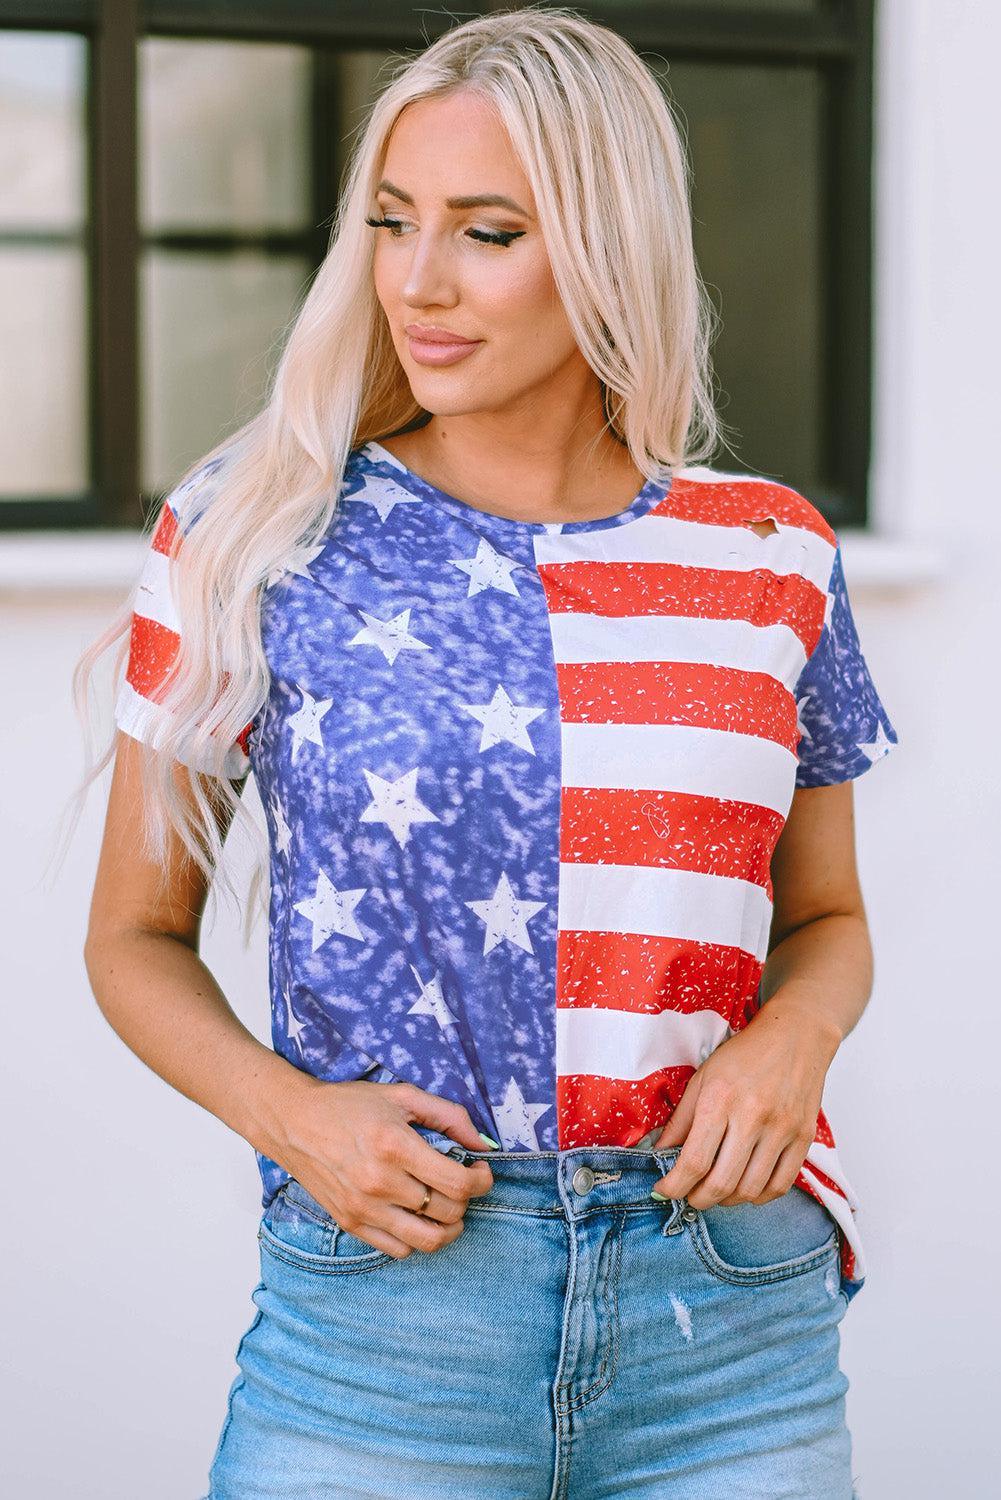 a woman with blonde hair wearing an american flag t - shirt